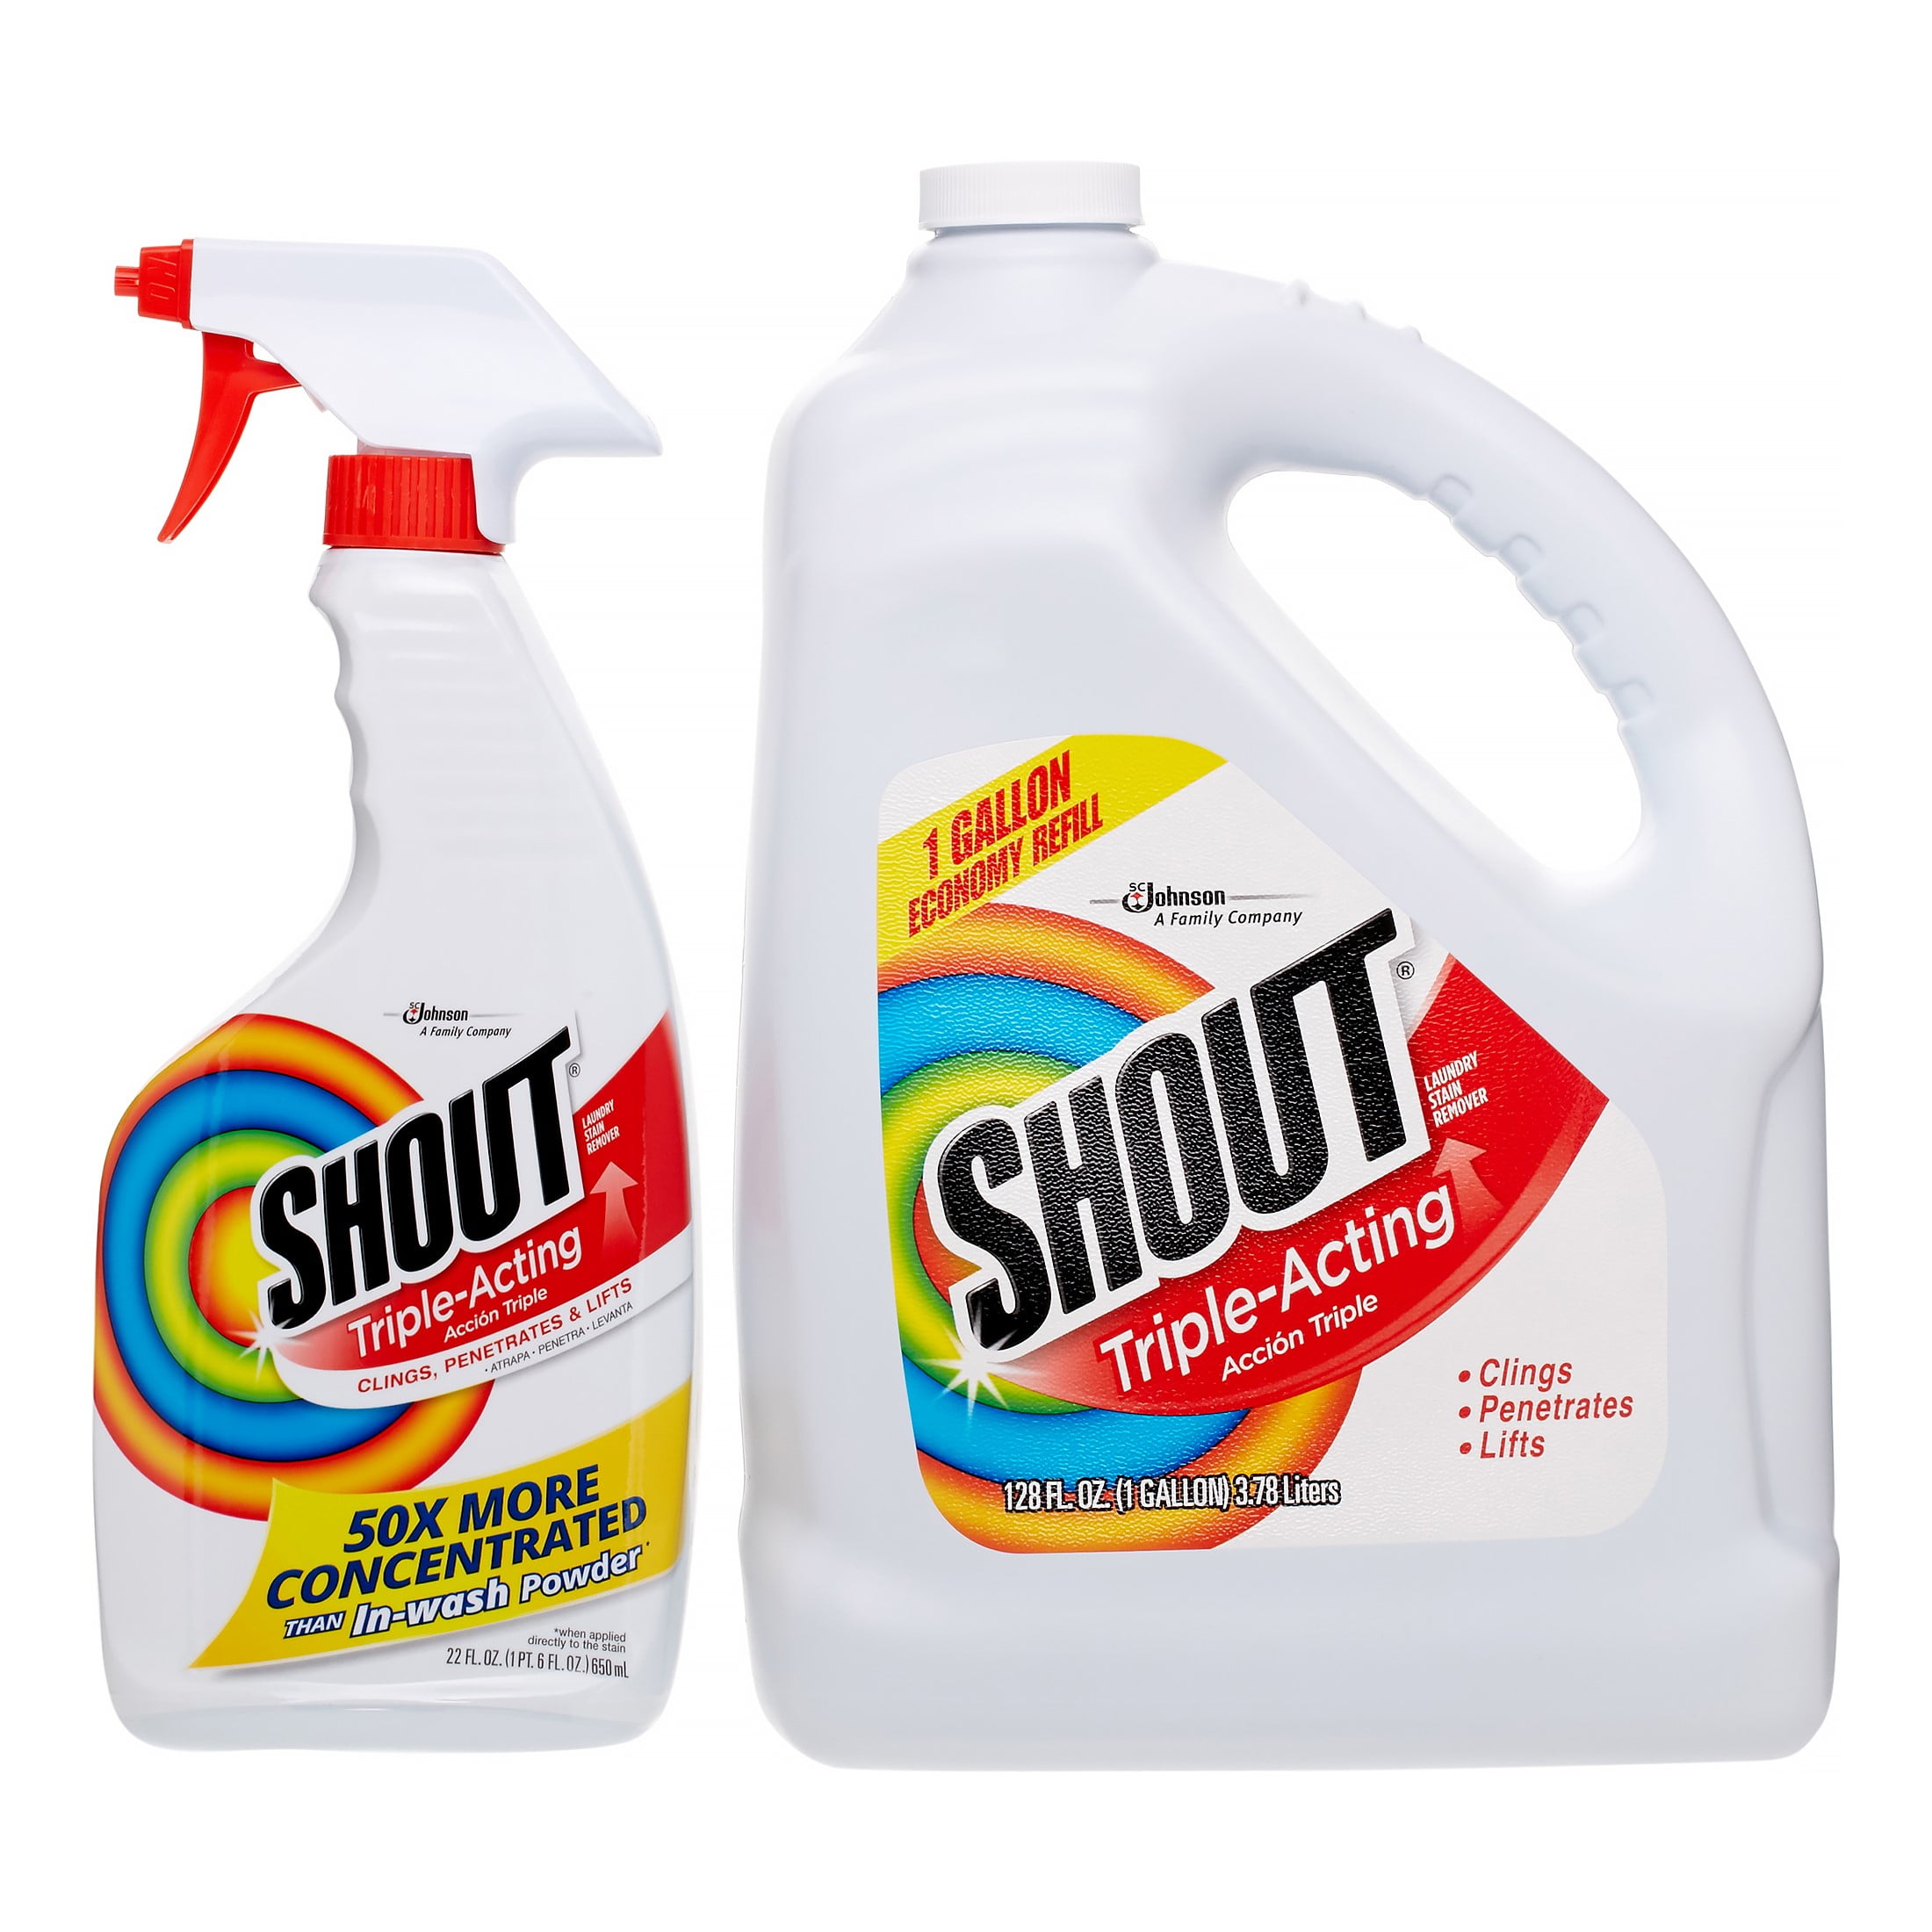 Shout®' Stain Remover Spray Triple Acting 22 Fl Oz, Shout®' Stain Remover  Refill 60 Fl Oz. Includes PureDealus Foldable Silicone Funnel. 3 Piece Set.